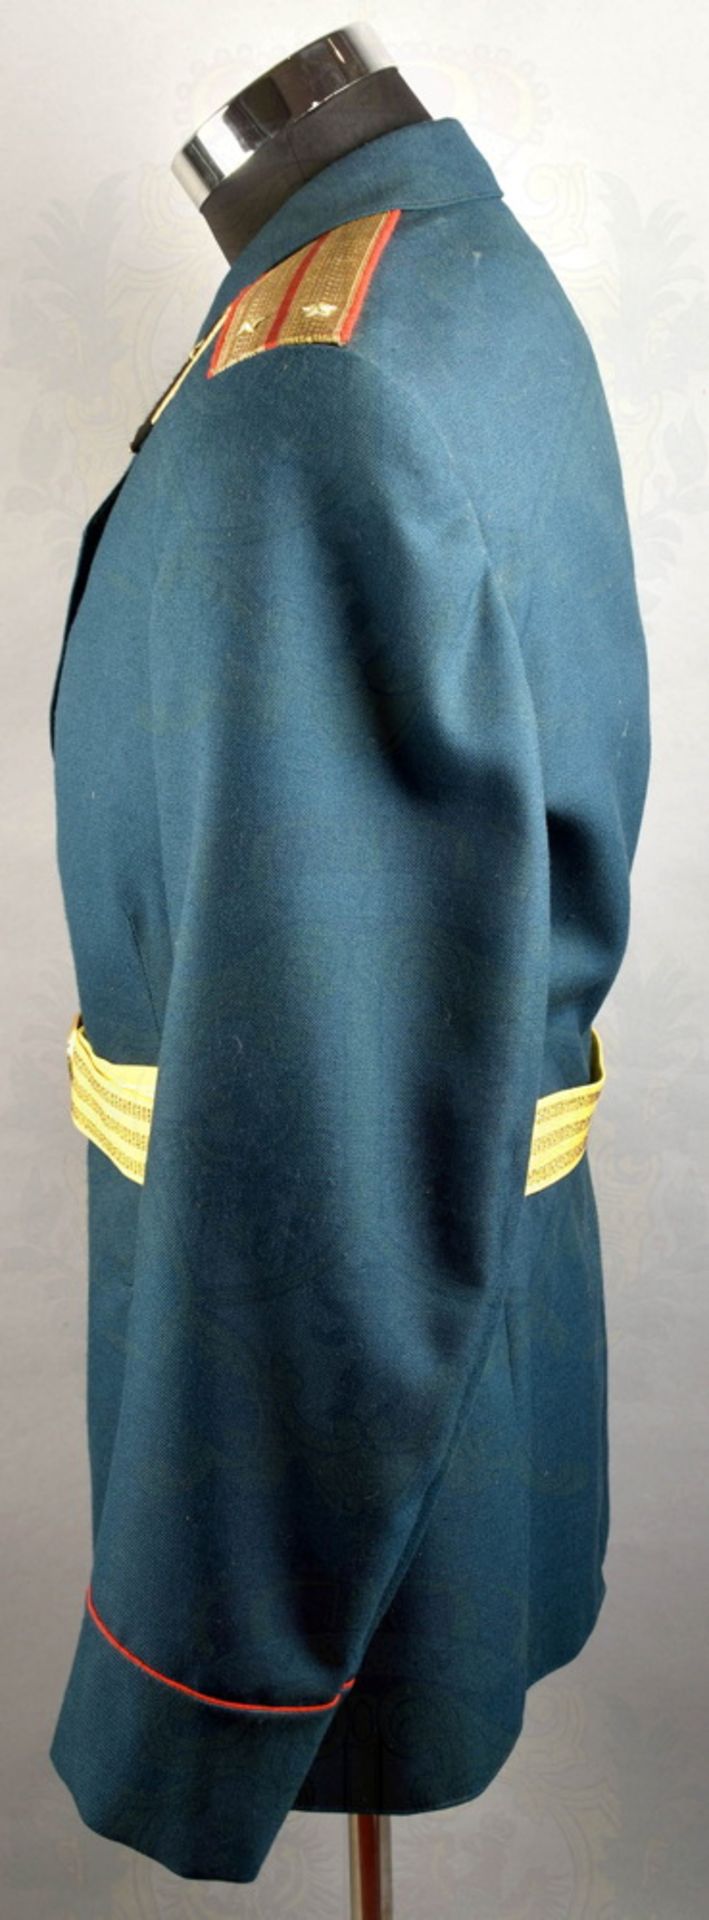 Parade tunic for a 2nd Lieutenant Soviet Army artillery - Image 2 of 5